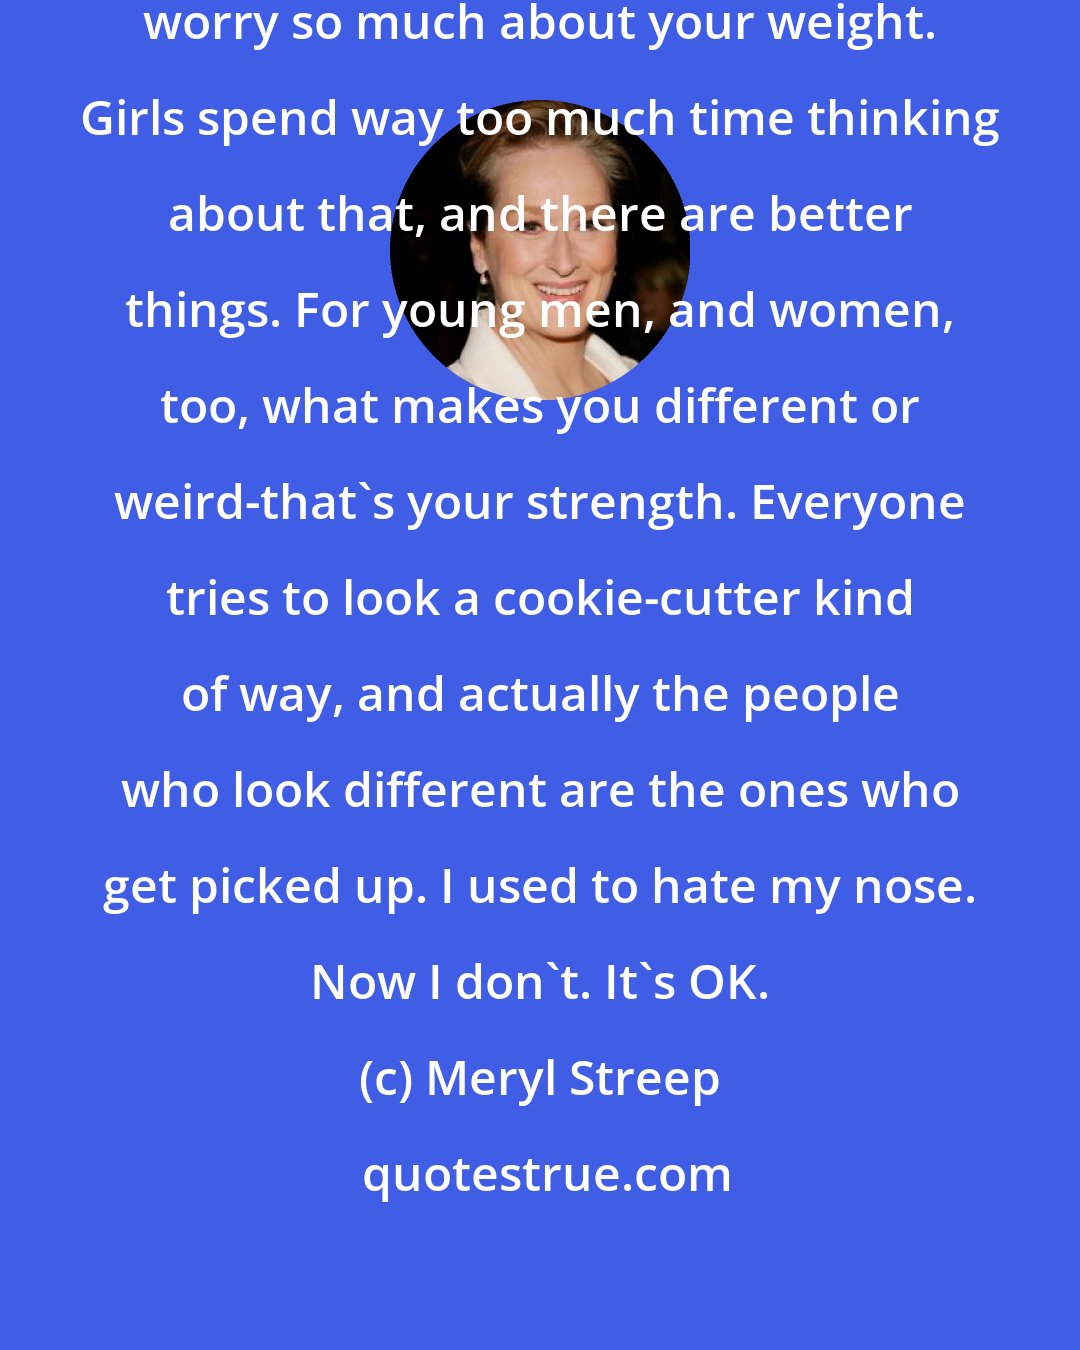 Meryl Streep: For young women, I would say don't worry so much about your weight. Girls spend way too much time thinking about that, and there are better things. For young men, and women, too, what makes you different or weird-that's your strength. Everyone tries to look a cookie-cutter kind of way, and actually the people who look different are the ones who get picked up. I used to hate my nose. Now I don't. It's OK.